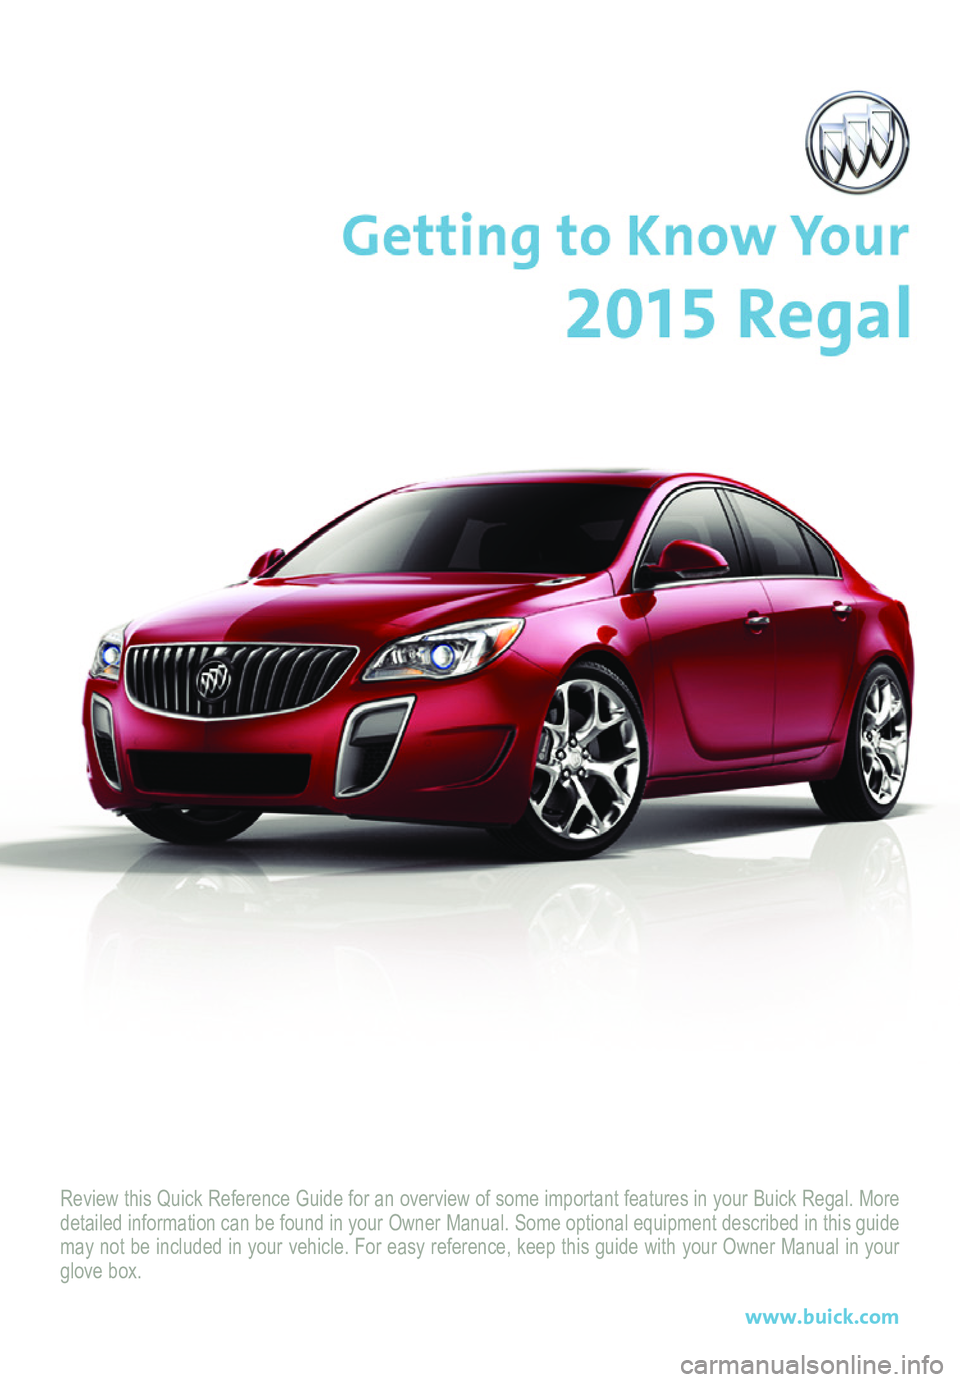 BUICK REGAL 2015  Get To Know Guide 